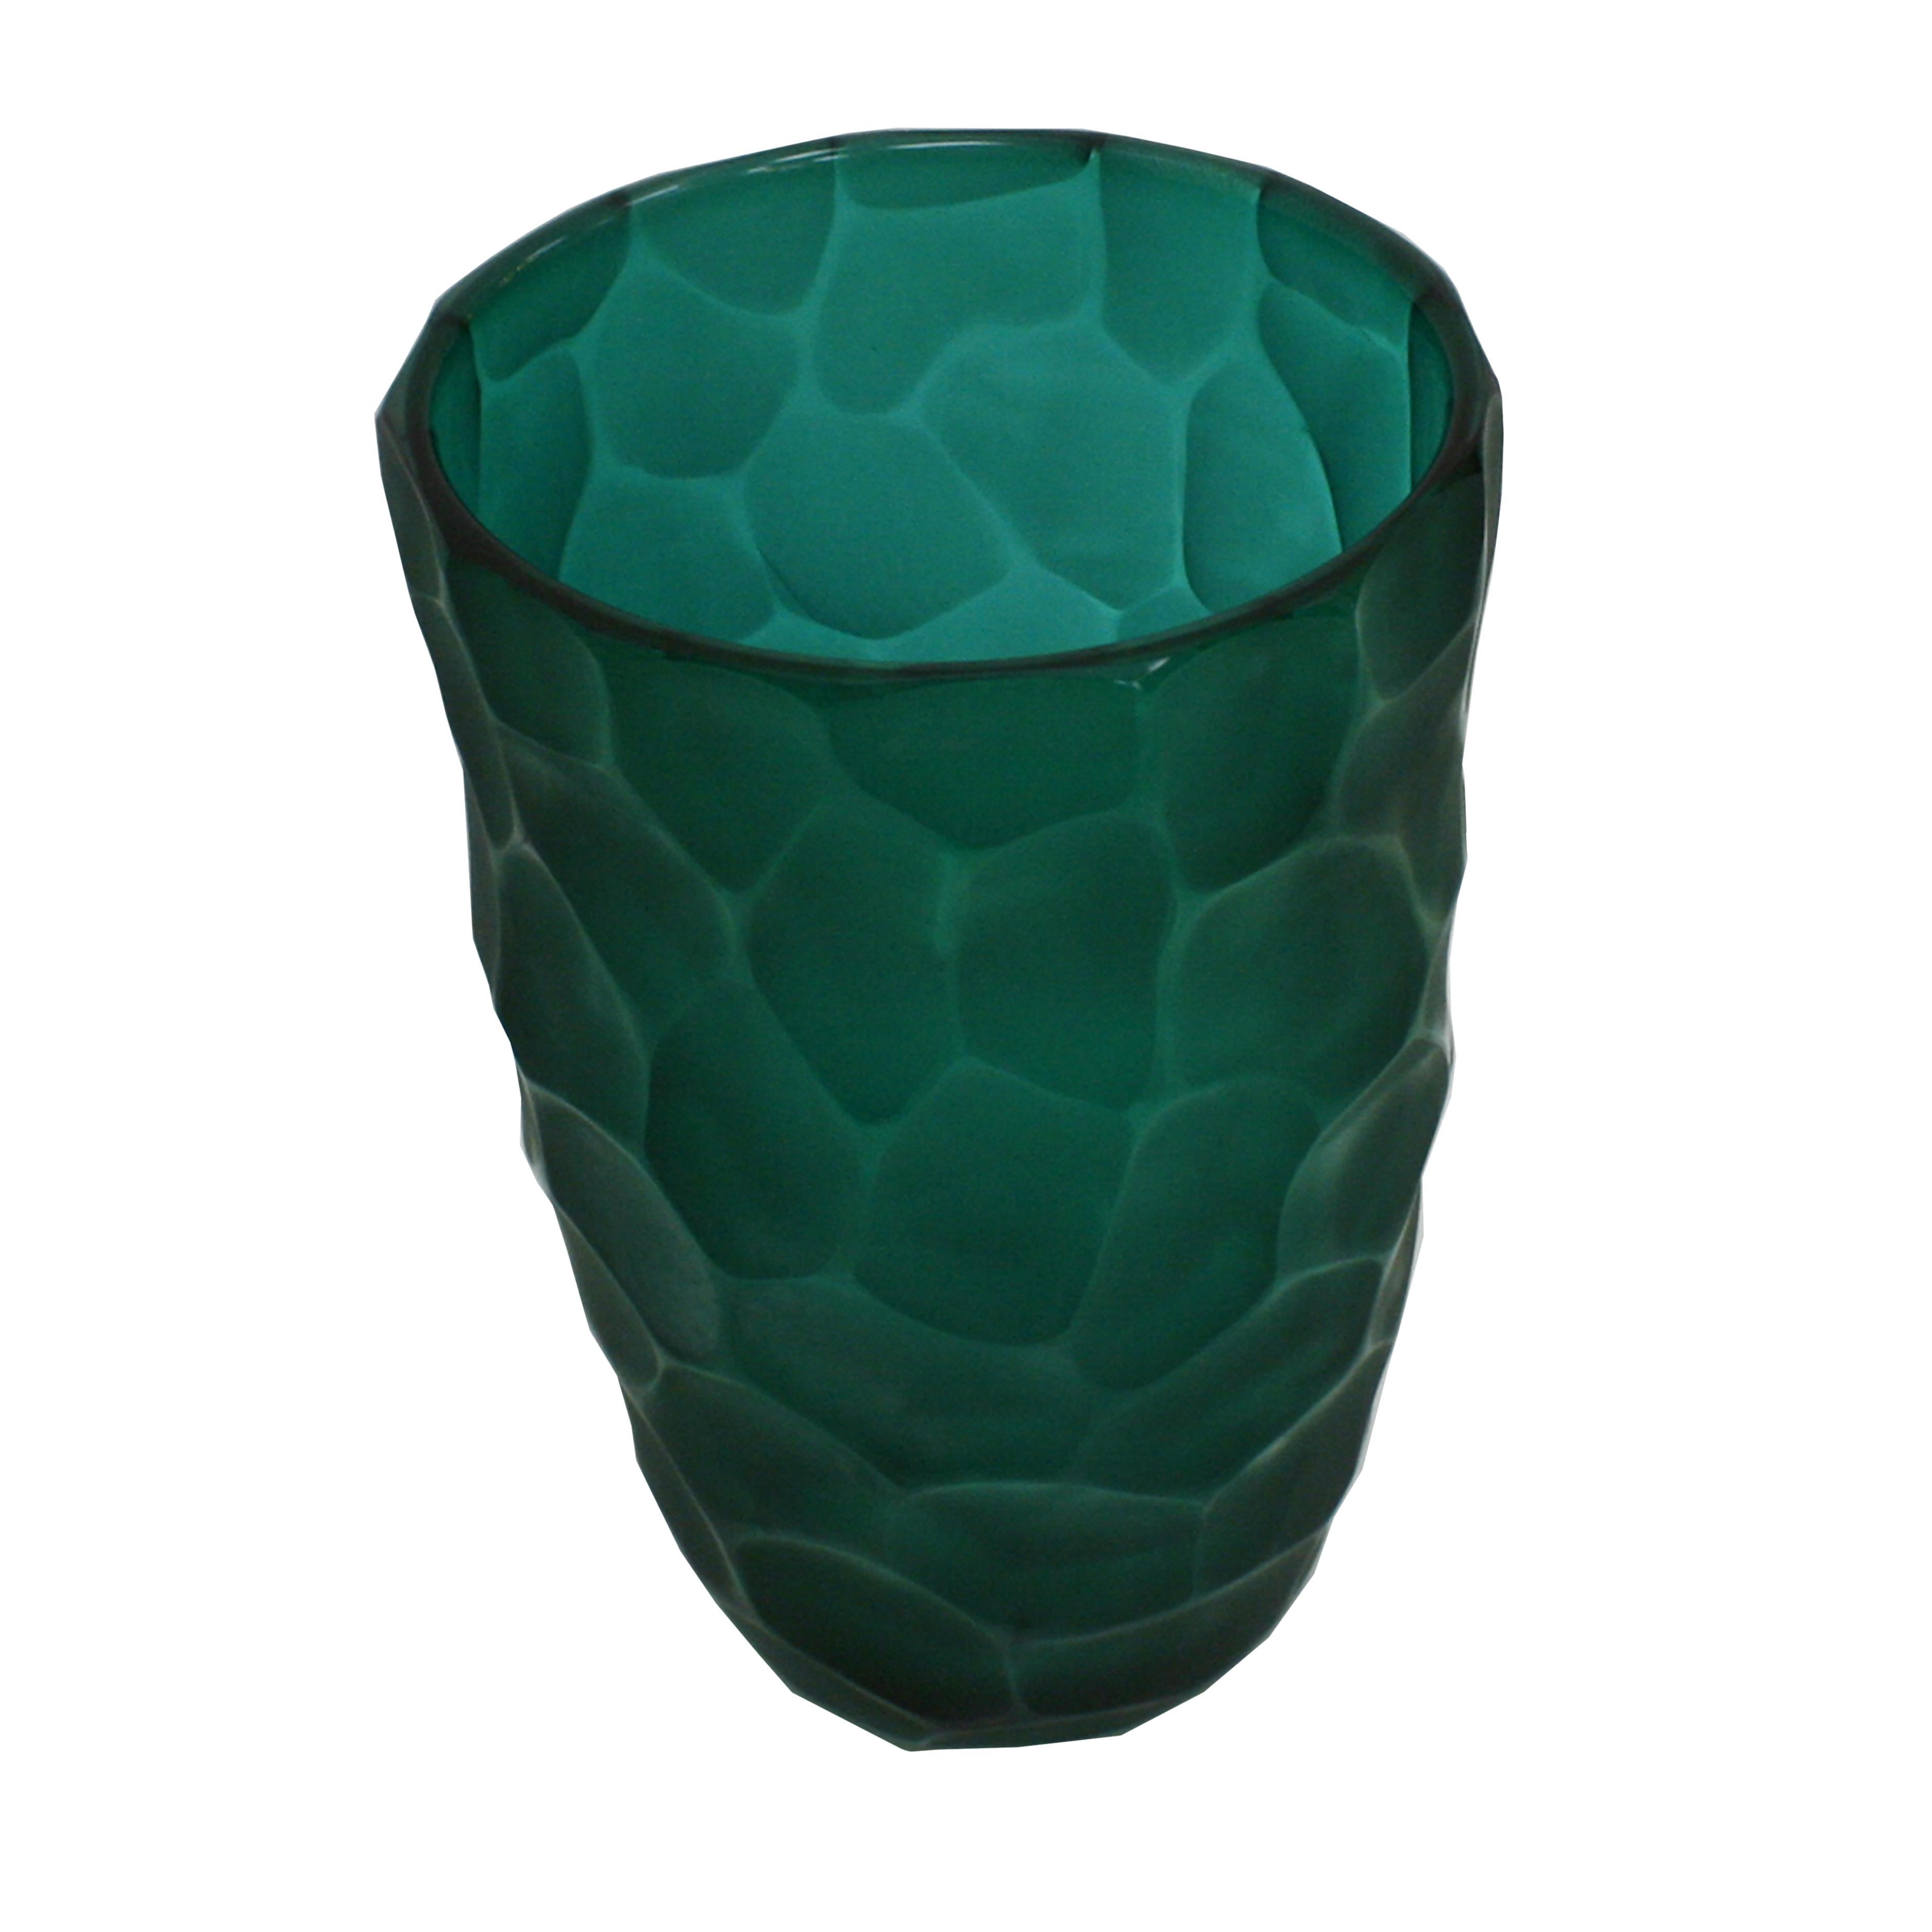 Sculptural vase designed by Davide Dona signed on the bottom. Handmade faceted green Murano glass. Italy, 1970s.

Davide Dona’ started to learn the glassmaking first working in a paperweight furnace, then from 1998 in his father company.
His